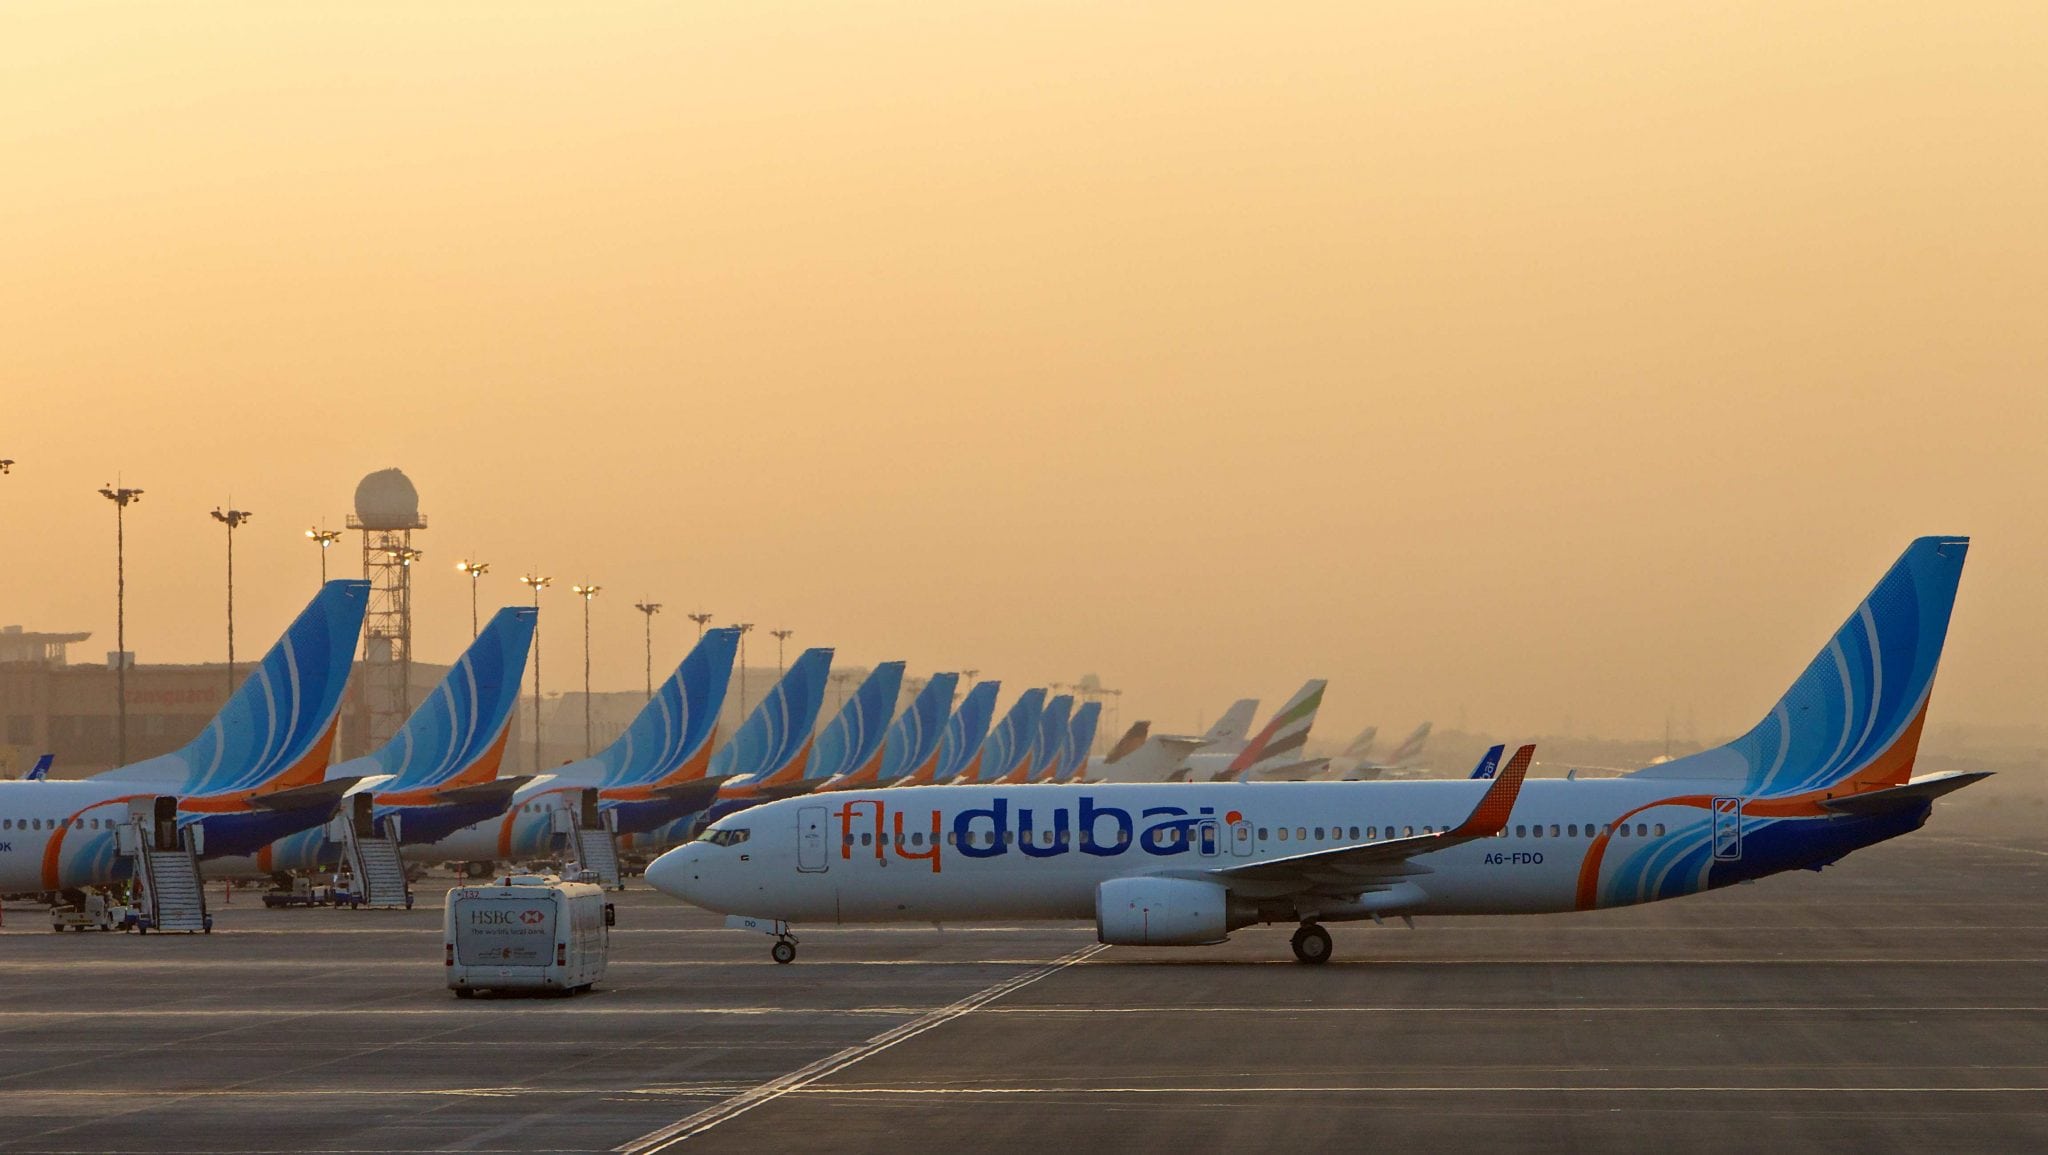 flydubai is looking to incorporate Rockwell Collins avionics into its fleet in coming years